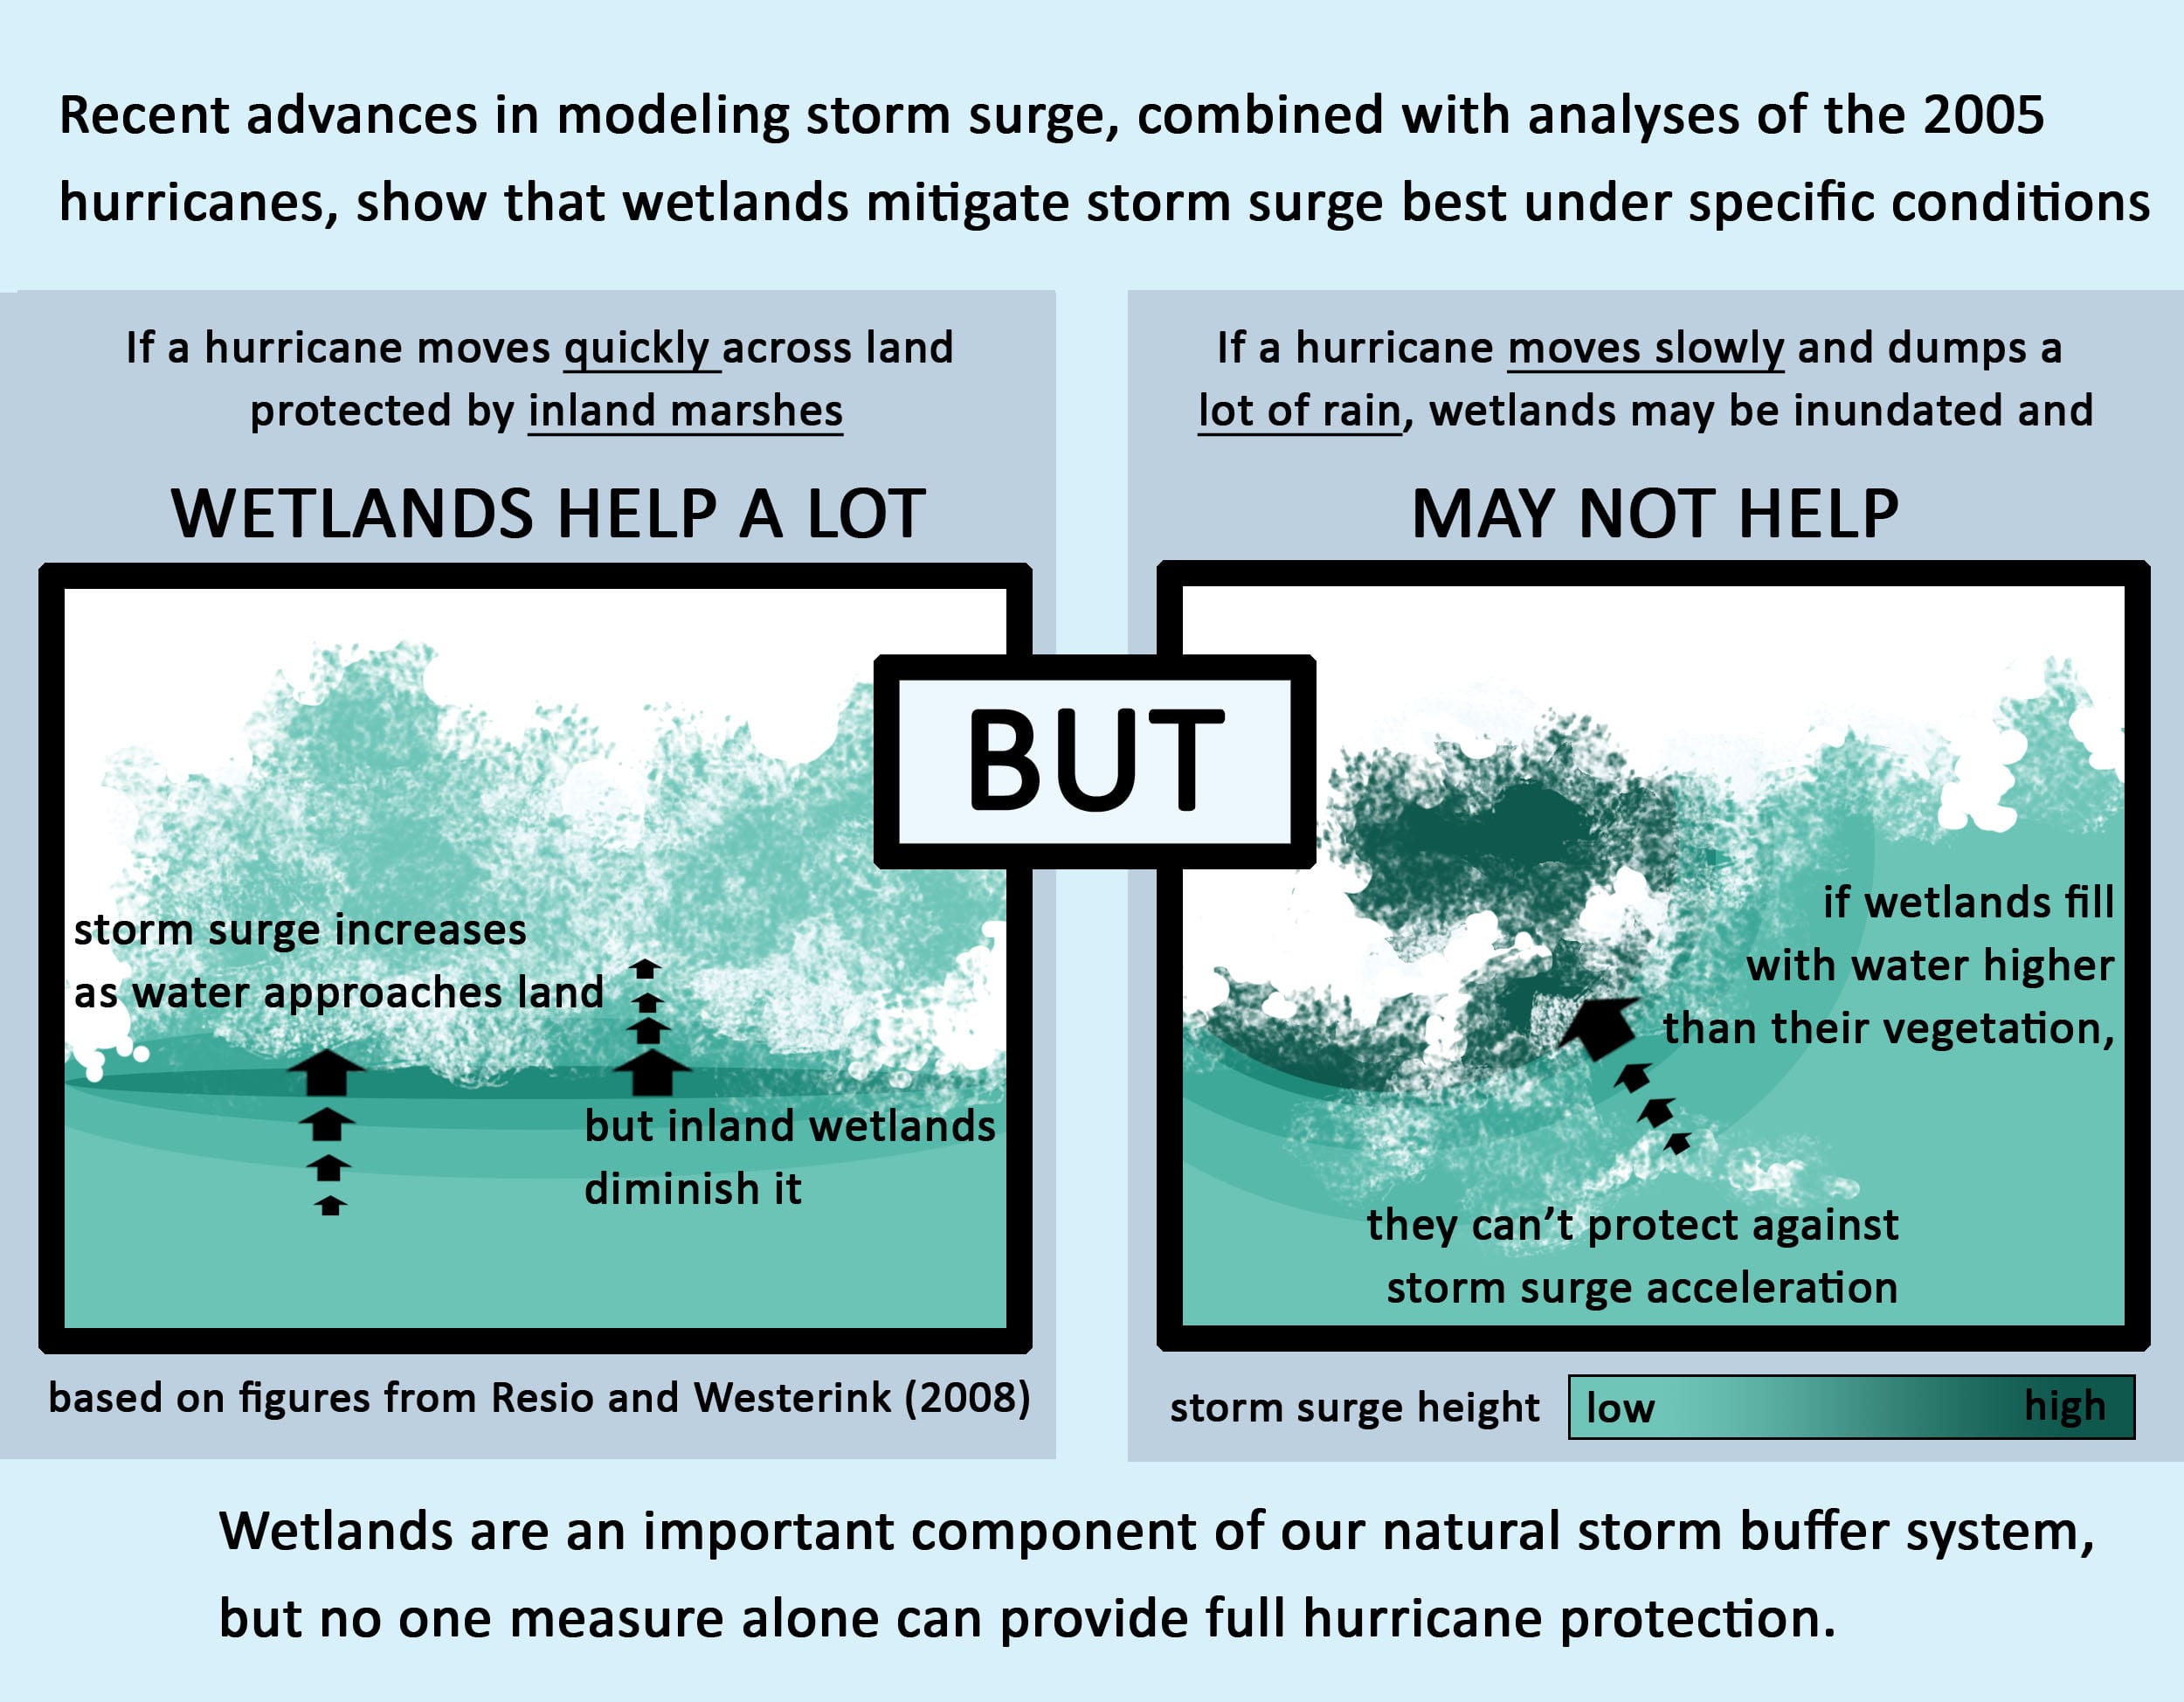 Recent advances show that wetlands mitigate storm surge best when a hurricane moves quickly across land protected by inland marshes, but are less helpful when hurricanes move slowly